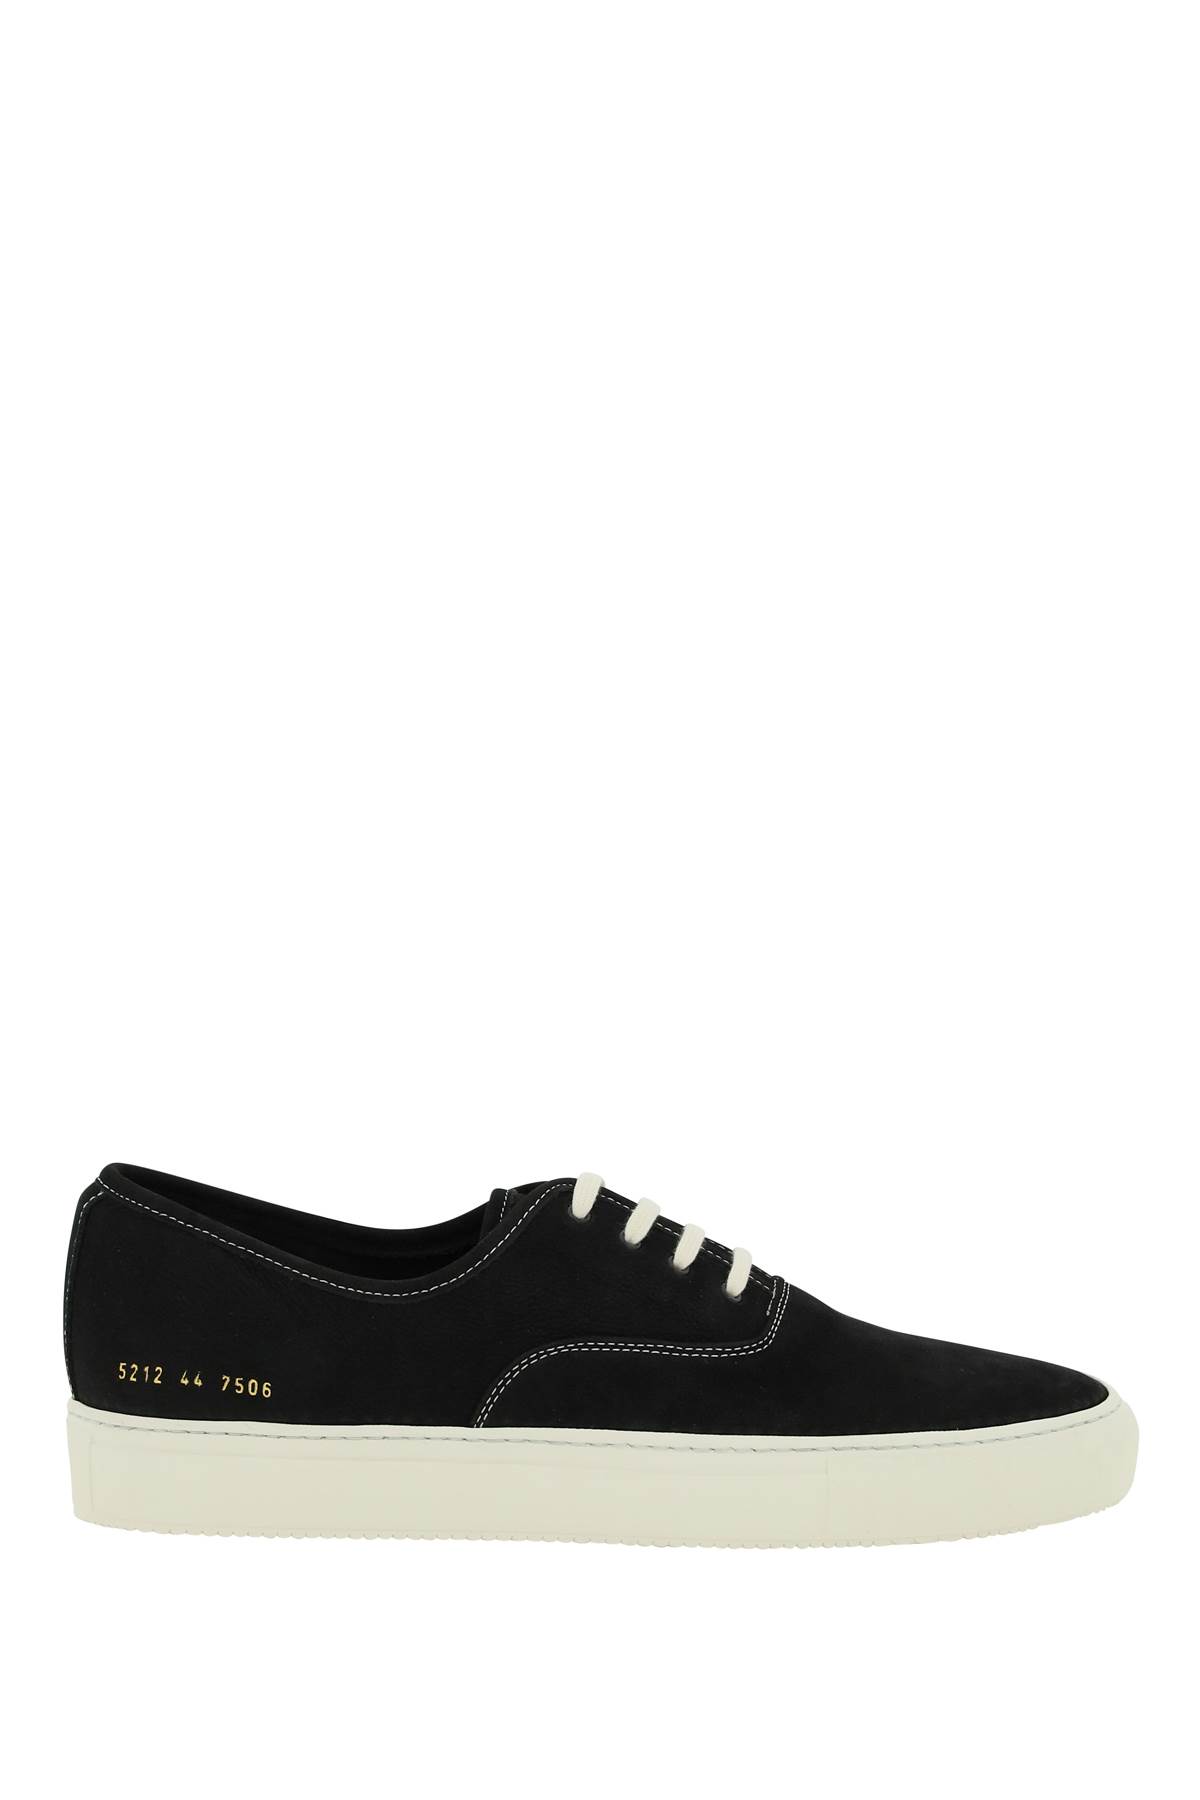 Common Projects Suede Leather four Hole Sneakers